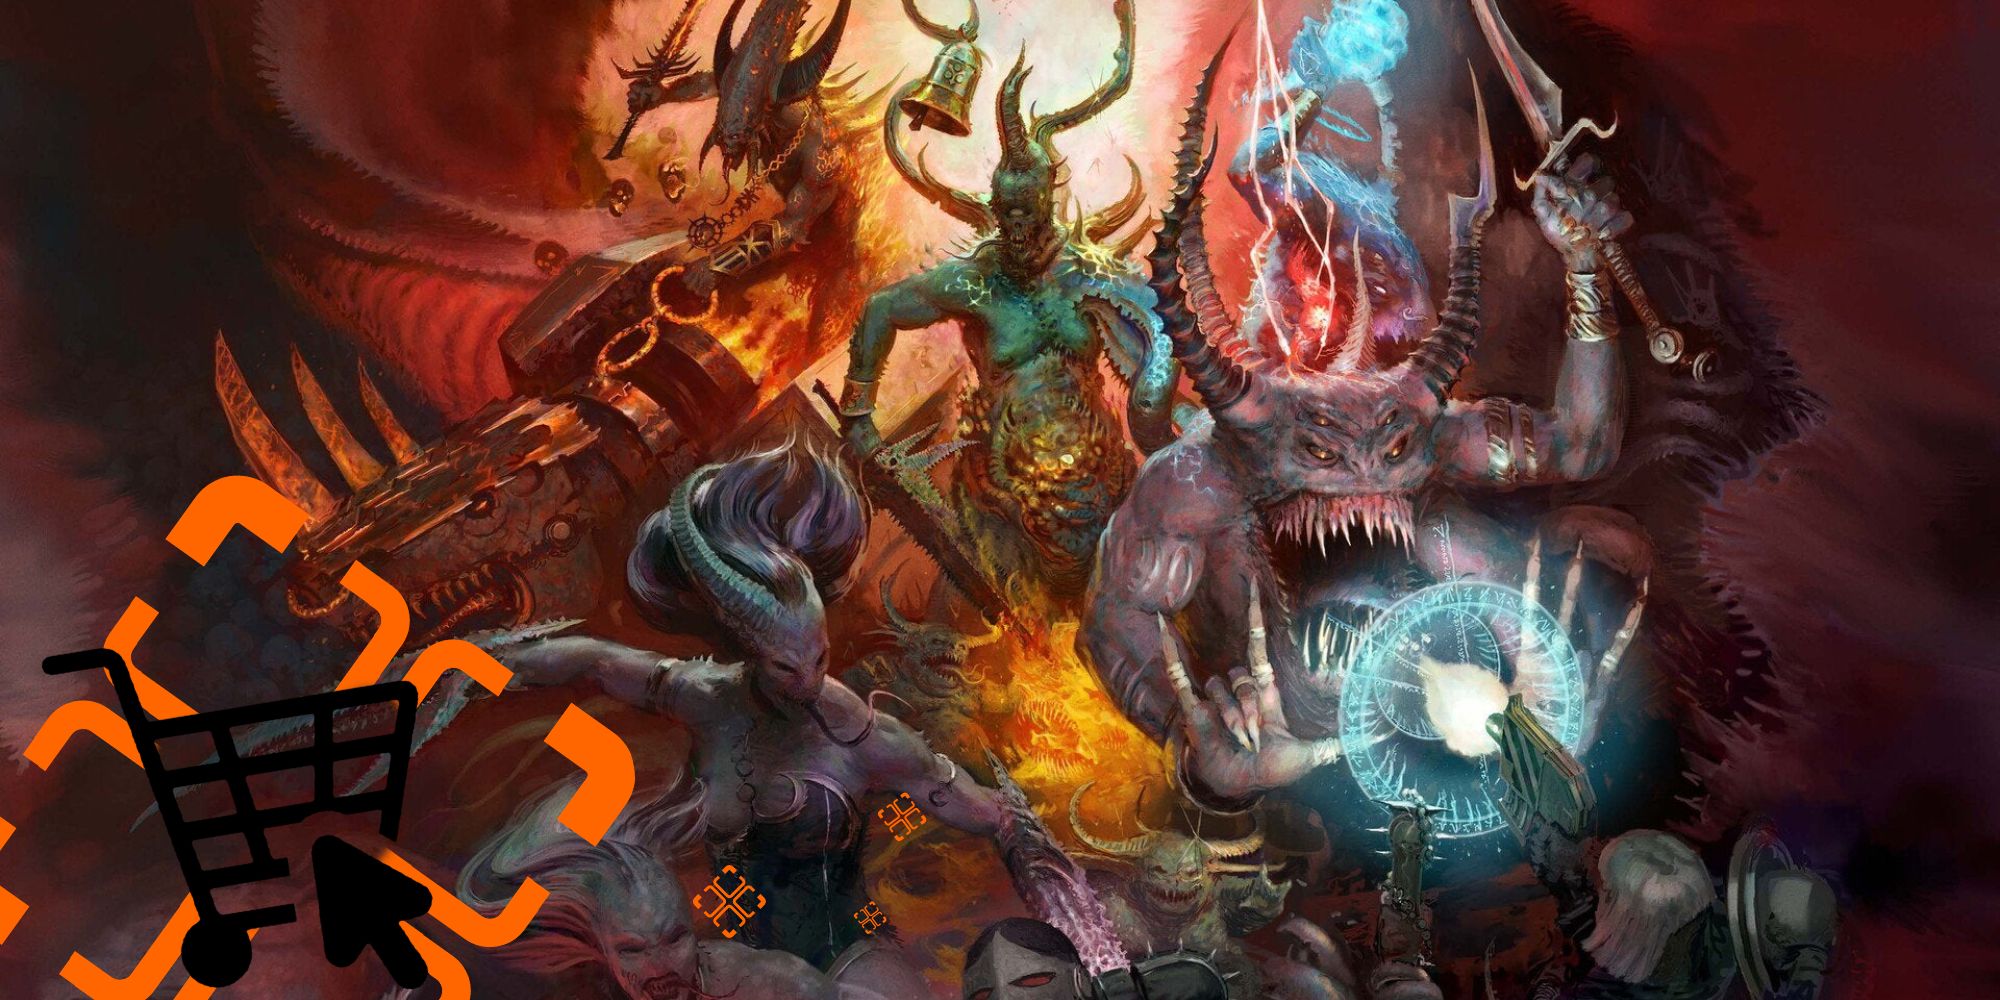 The Best Chaos Daemon Model Kits For Both Warhammer 40k And Warhammer Age Of Sigmar